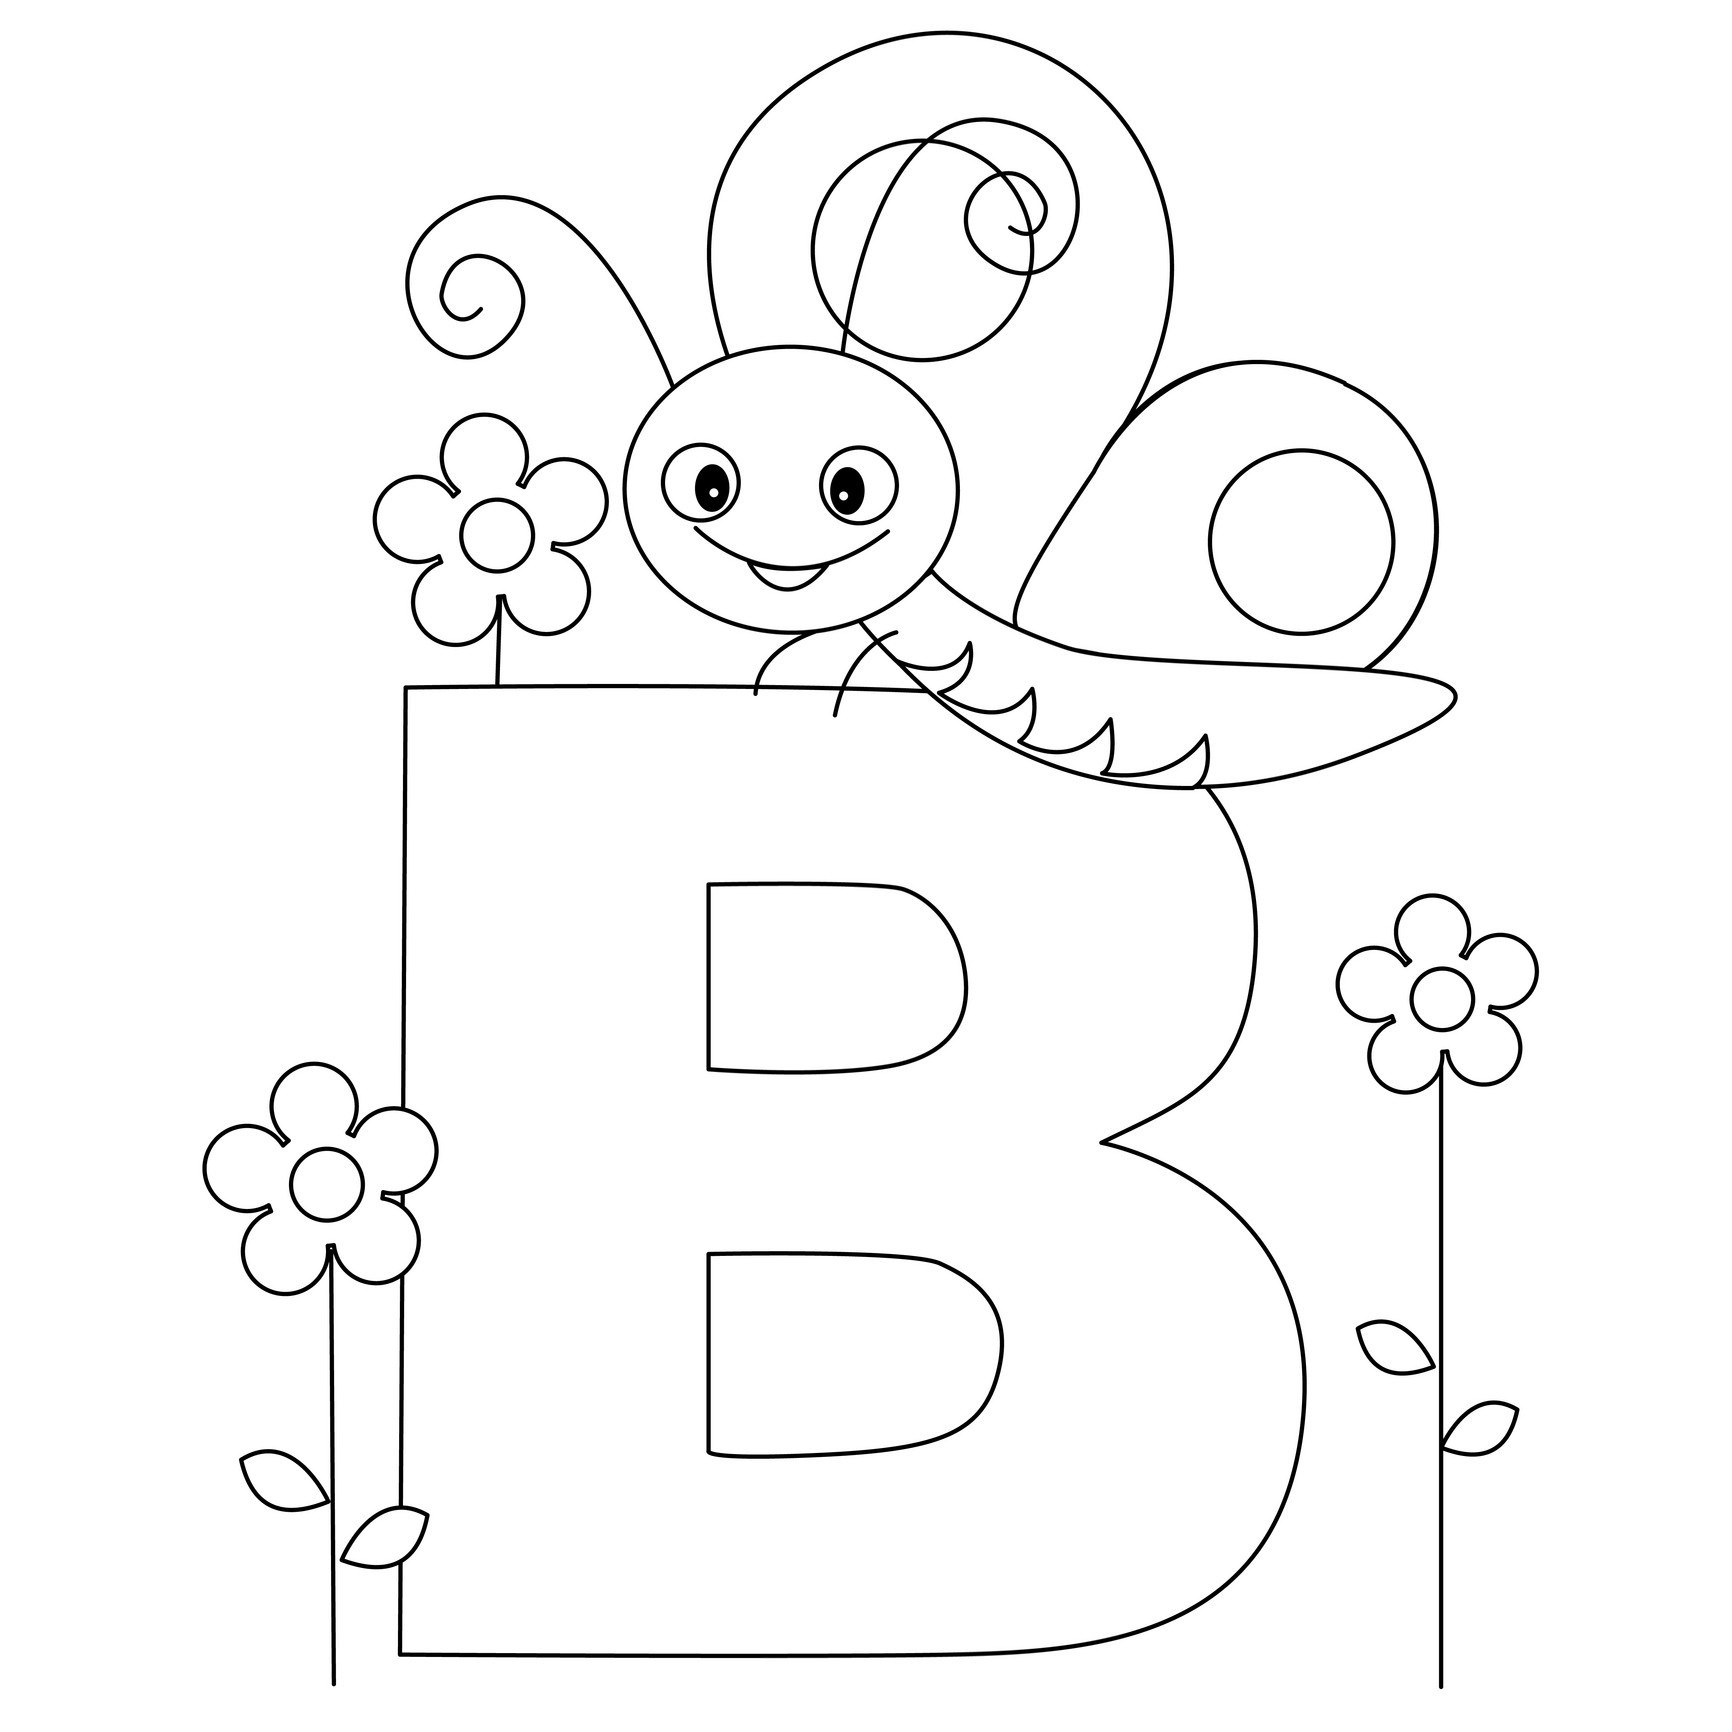 Free Printable Alphabet Coloring Pages For Kids - Best Coloring - Free Printable Alphabet Letters To Color